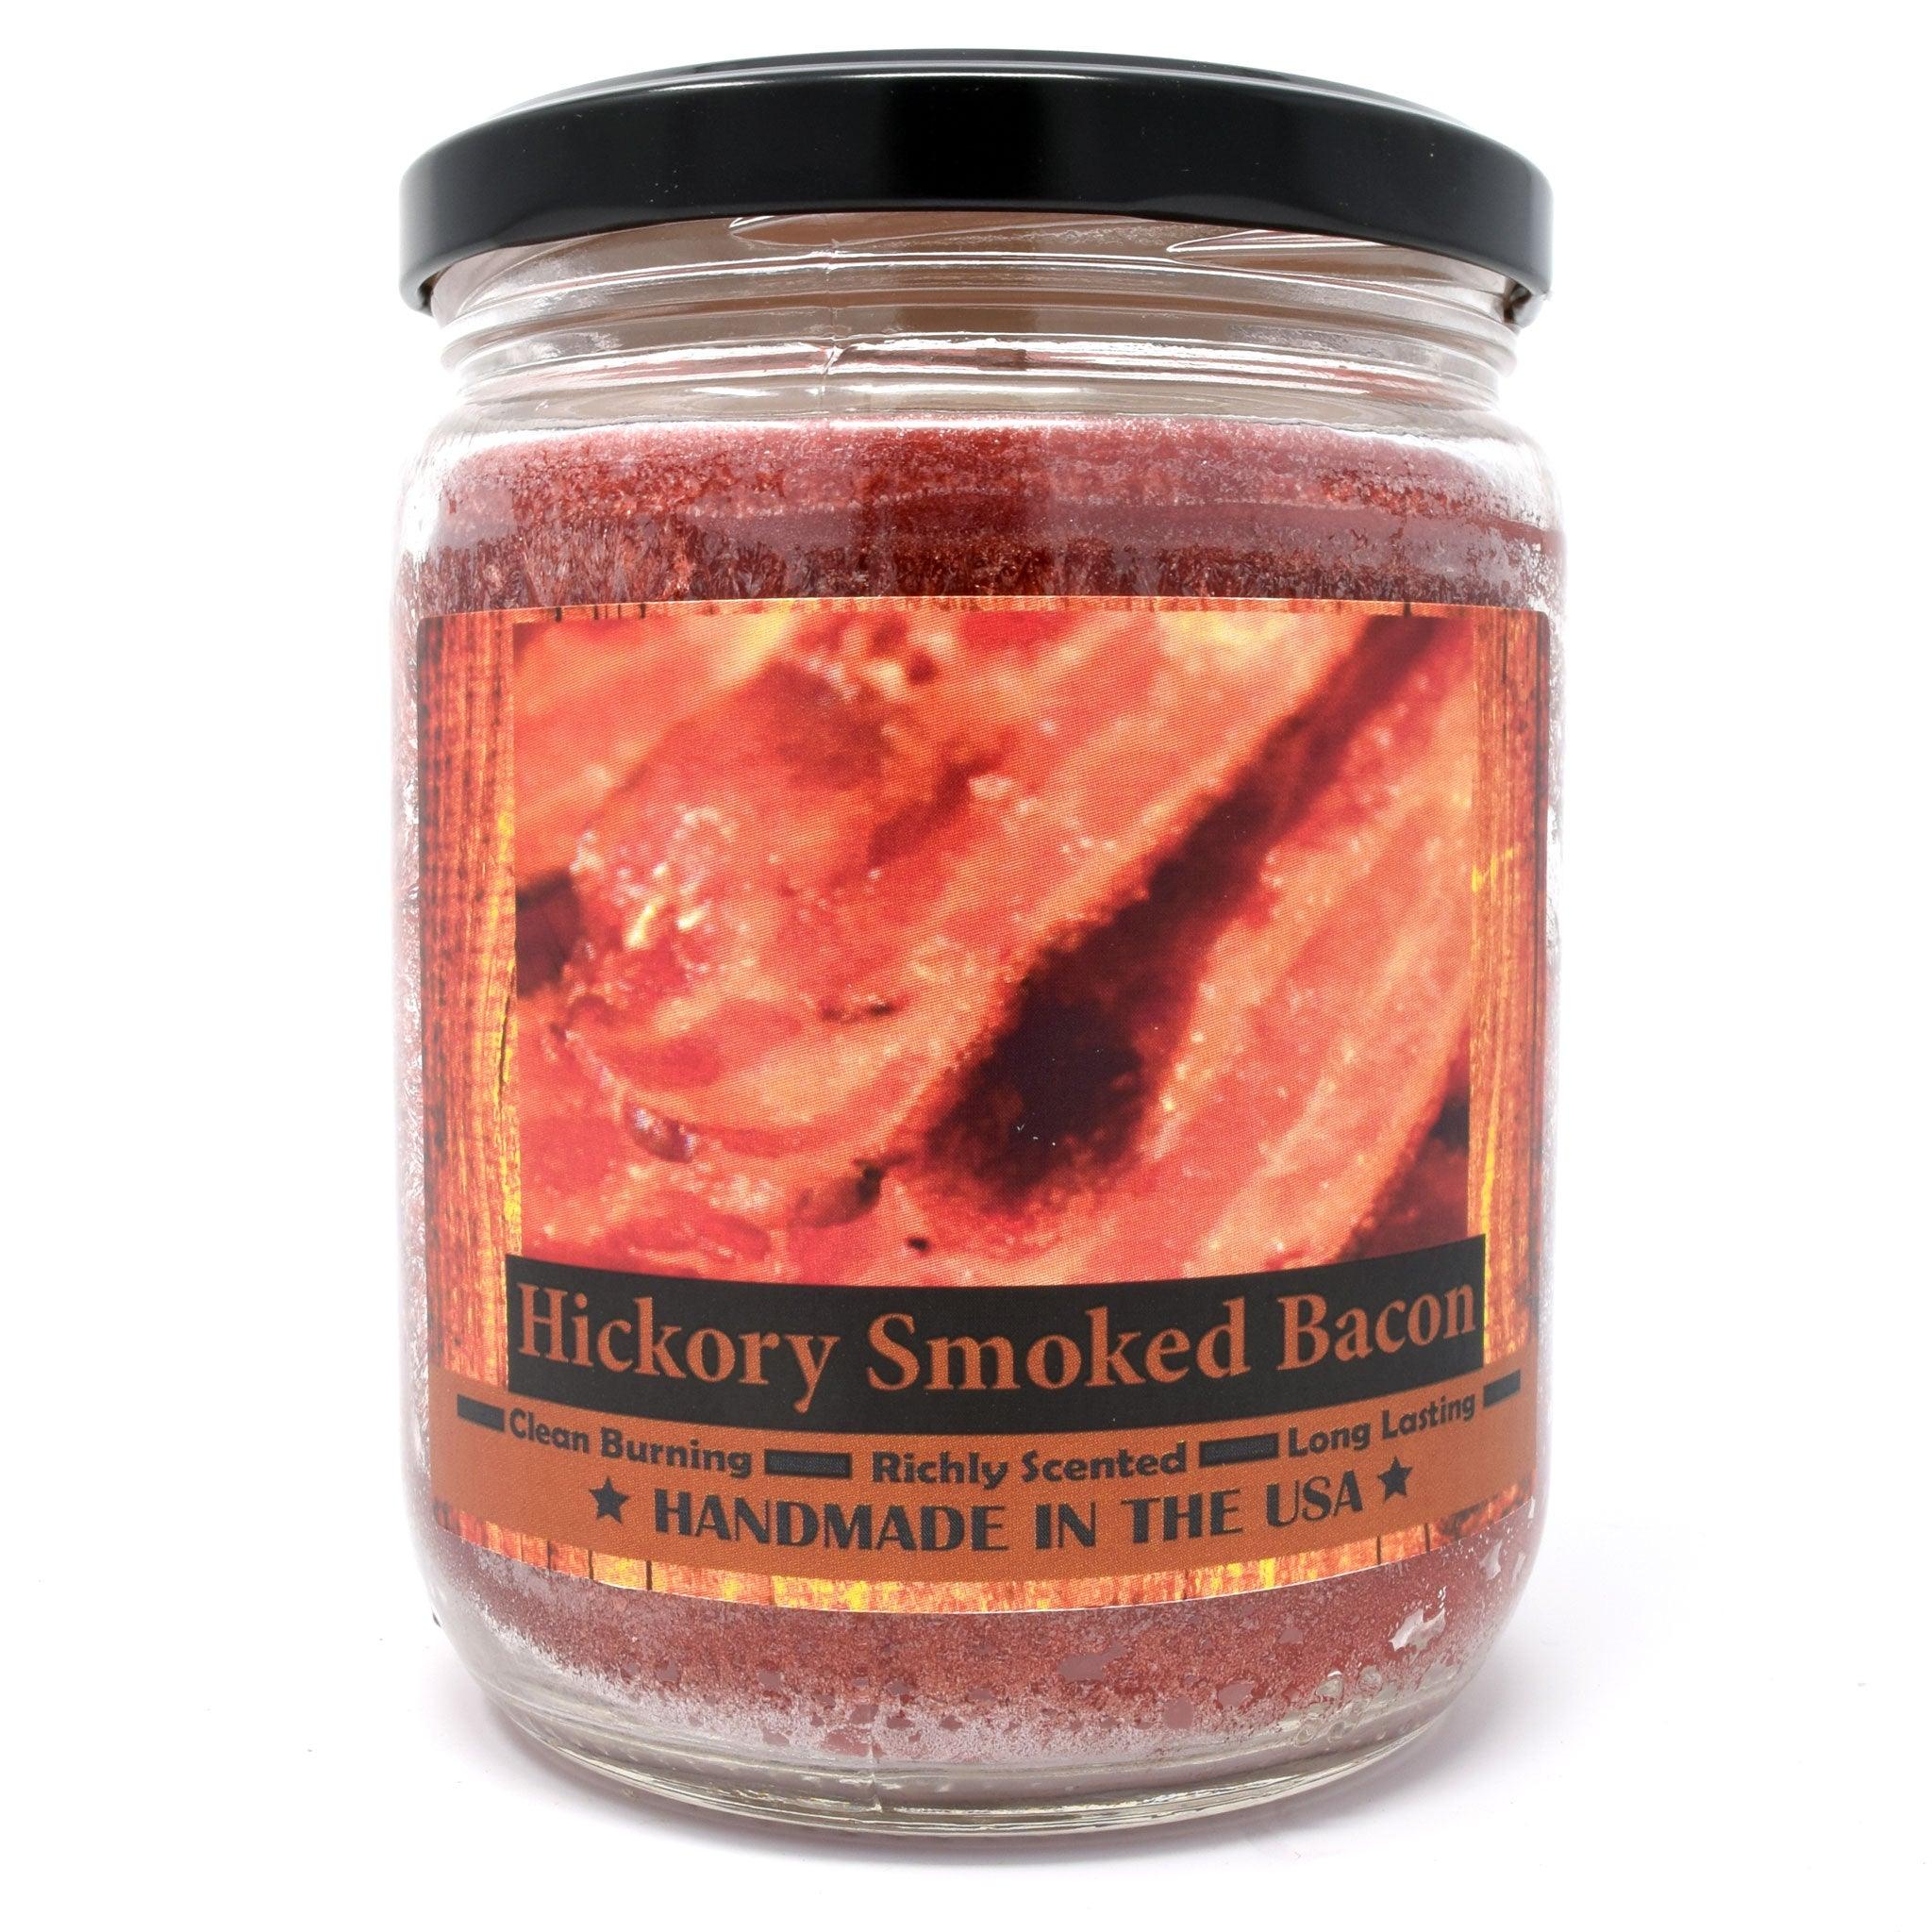 Hickory Smoked Bacon, 14oz Candle Jar - Candeo Candle